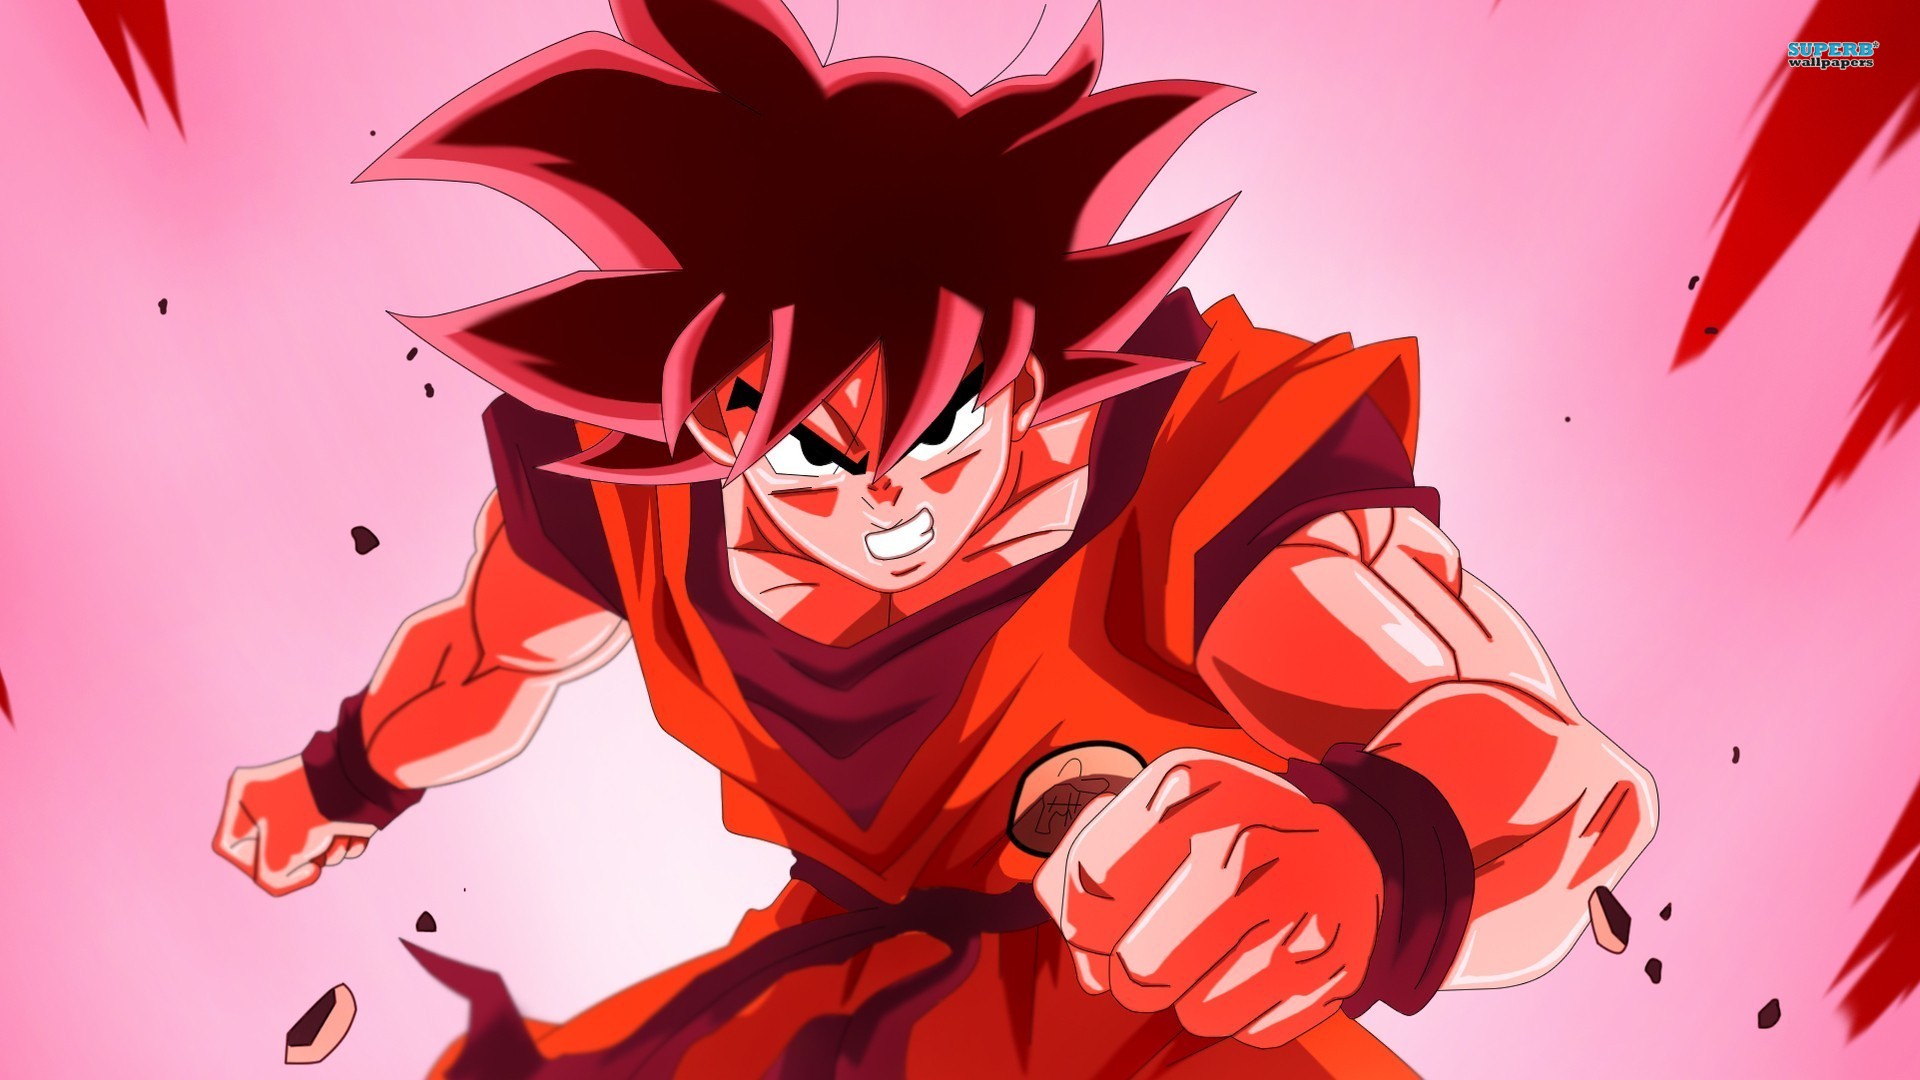 444 Dragon Ball Z HD Wallpapers | Backgrounds - Wallpaper Abyss